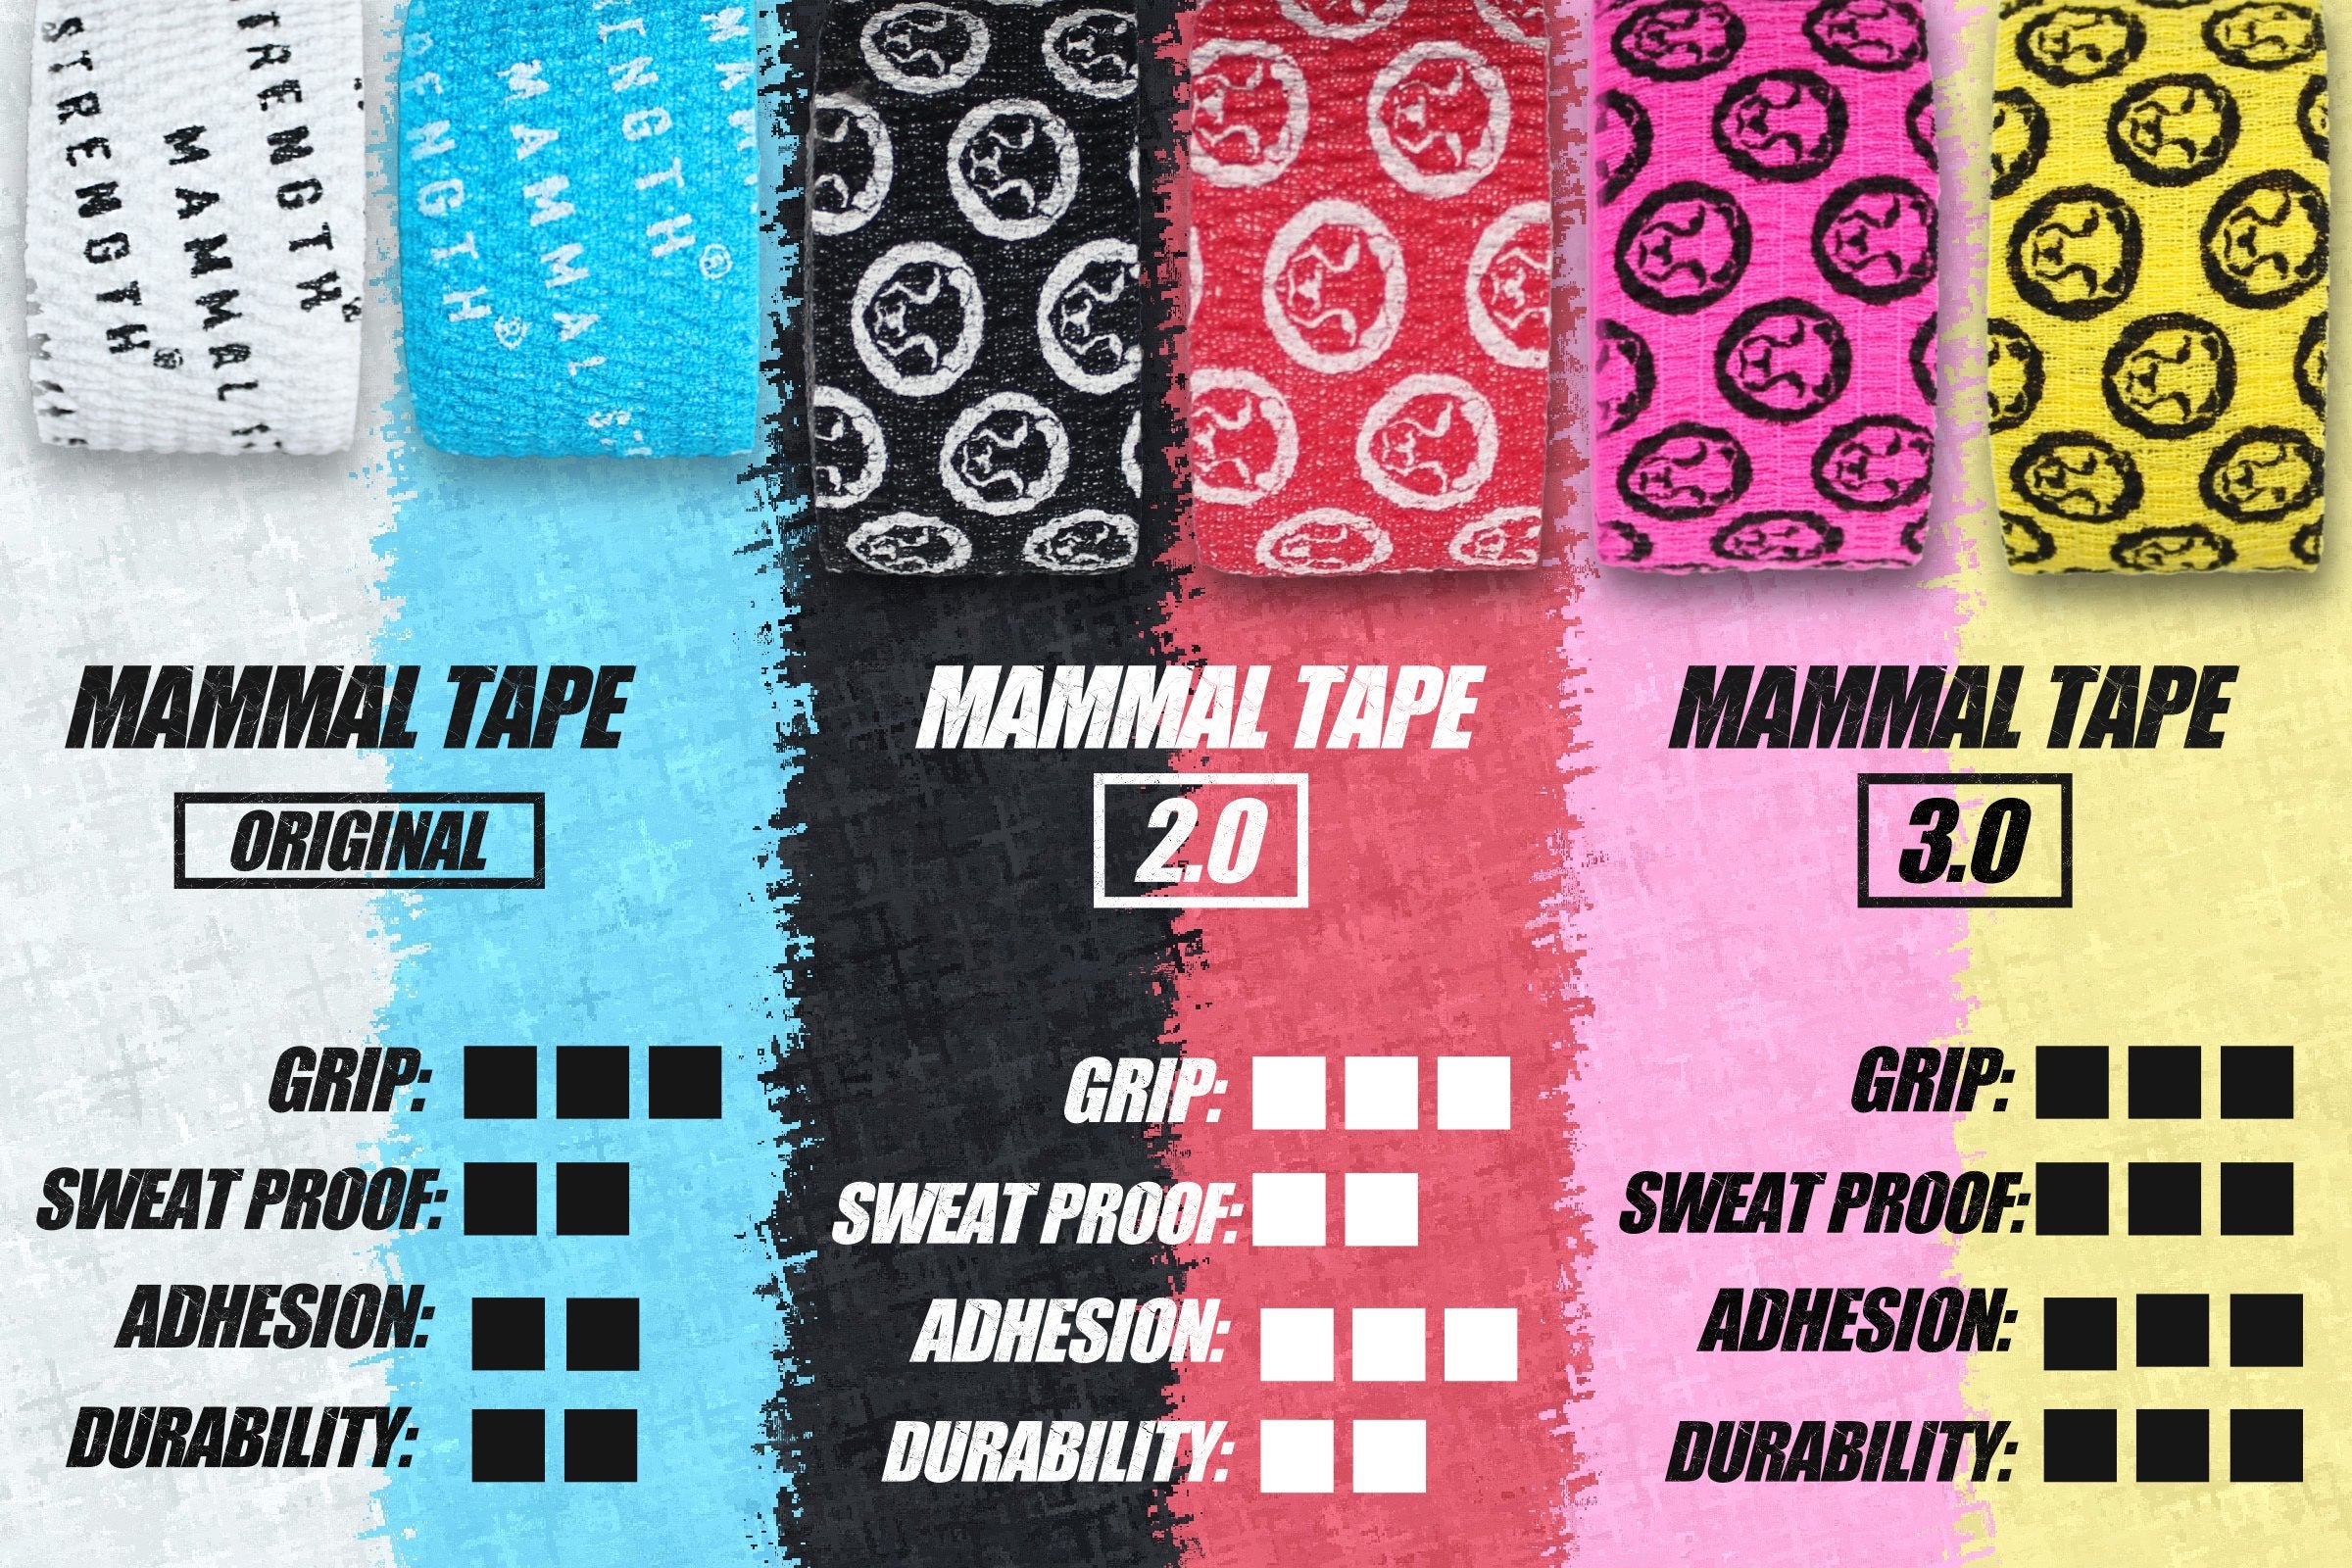 Pink Thumb &amp; Weightlifting Tape - Mammal Tape 3.0, 30ft / 9-Metre Rolls (4-Pack)